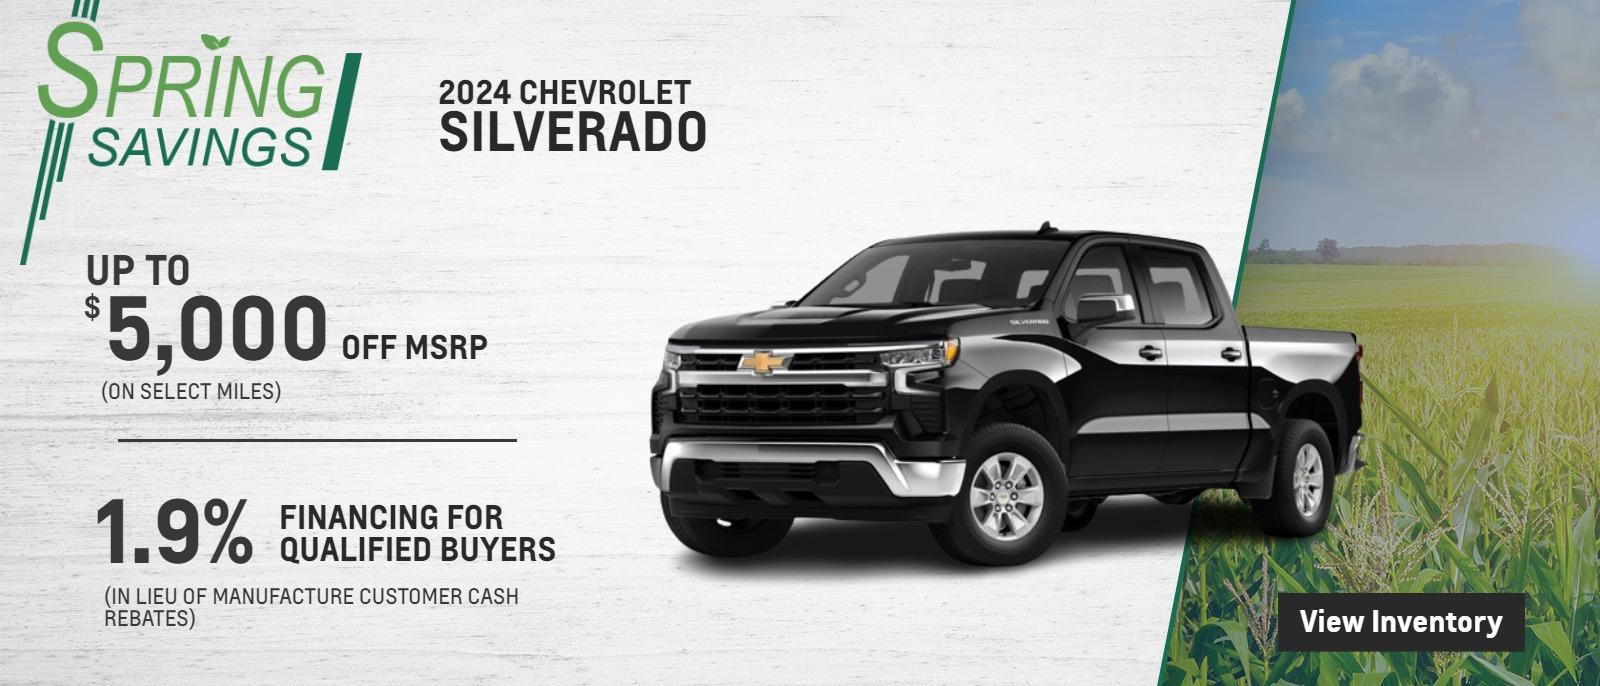 2024 SILVERADO 
UP TO $10,000 OFF MSRP (ON SELECT MILES) 1.9% FINANCING FOR QUALIFIED BUYERS (IN LIEU OF MANUFACTURE CUSTOMER CASH REBATES